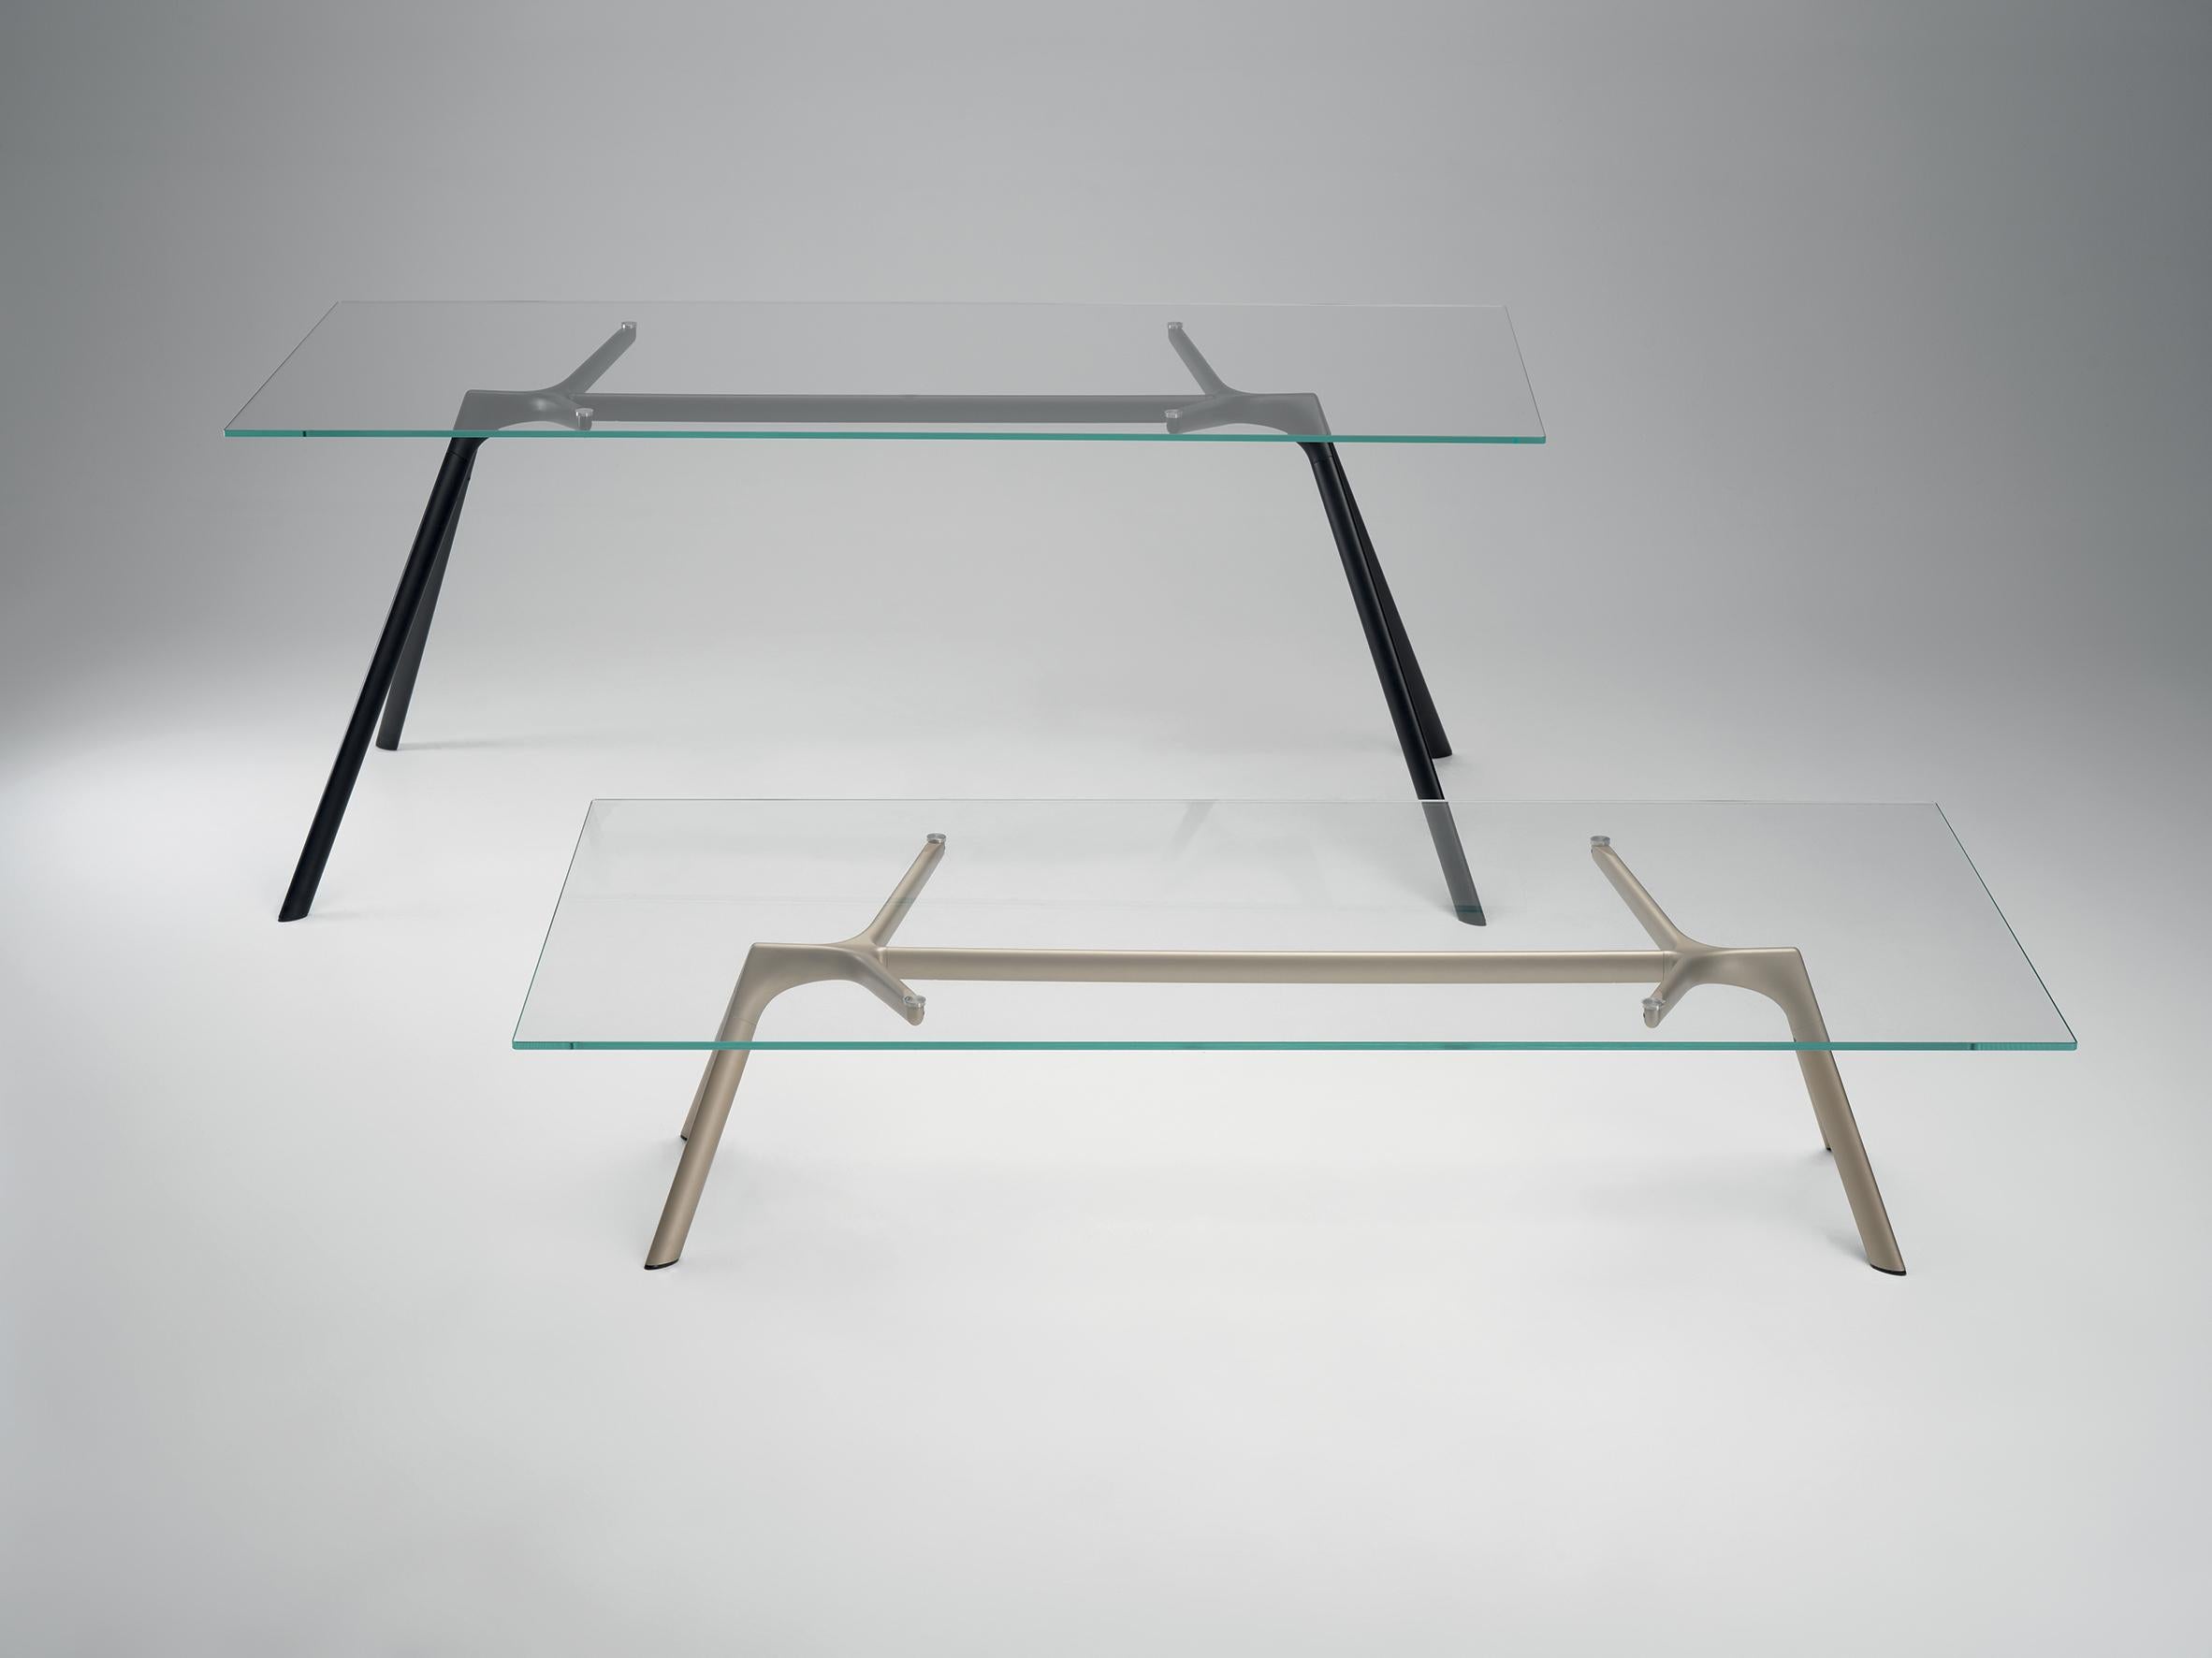 Alias Large Dry XS 45B Table in Glass Top with Anodised Gold Metallic Lacquered Aluminium Frame by Alberto Meda

Low table with structure made of lacquered aluminium elements. Top in extra light tempered glass, thickness 10 mm.

Born in Lenno